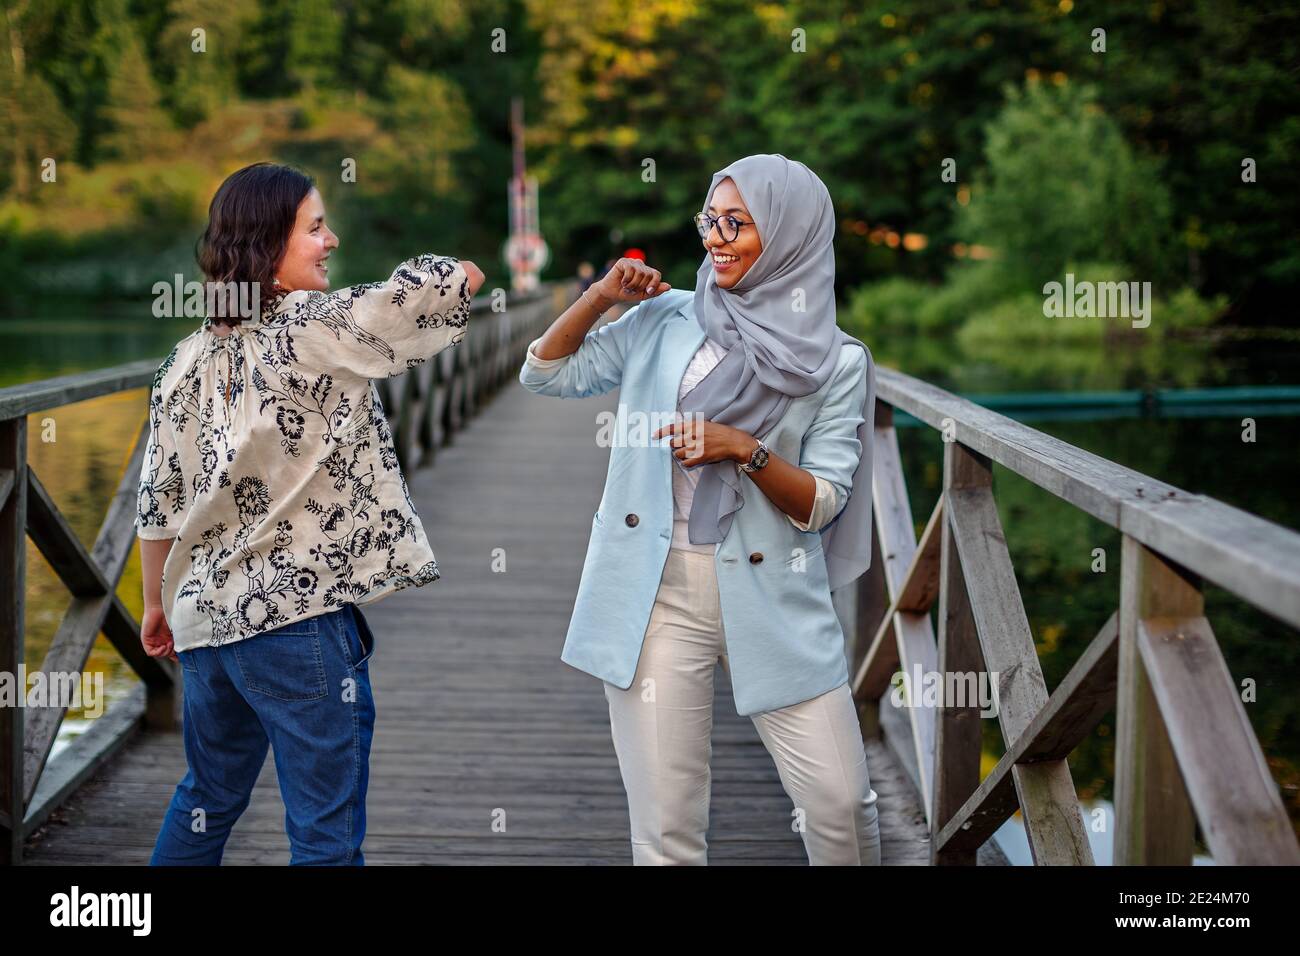 Female friends using elbow greeting Stock Photo